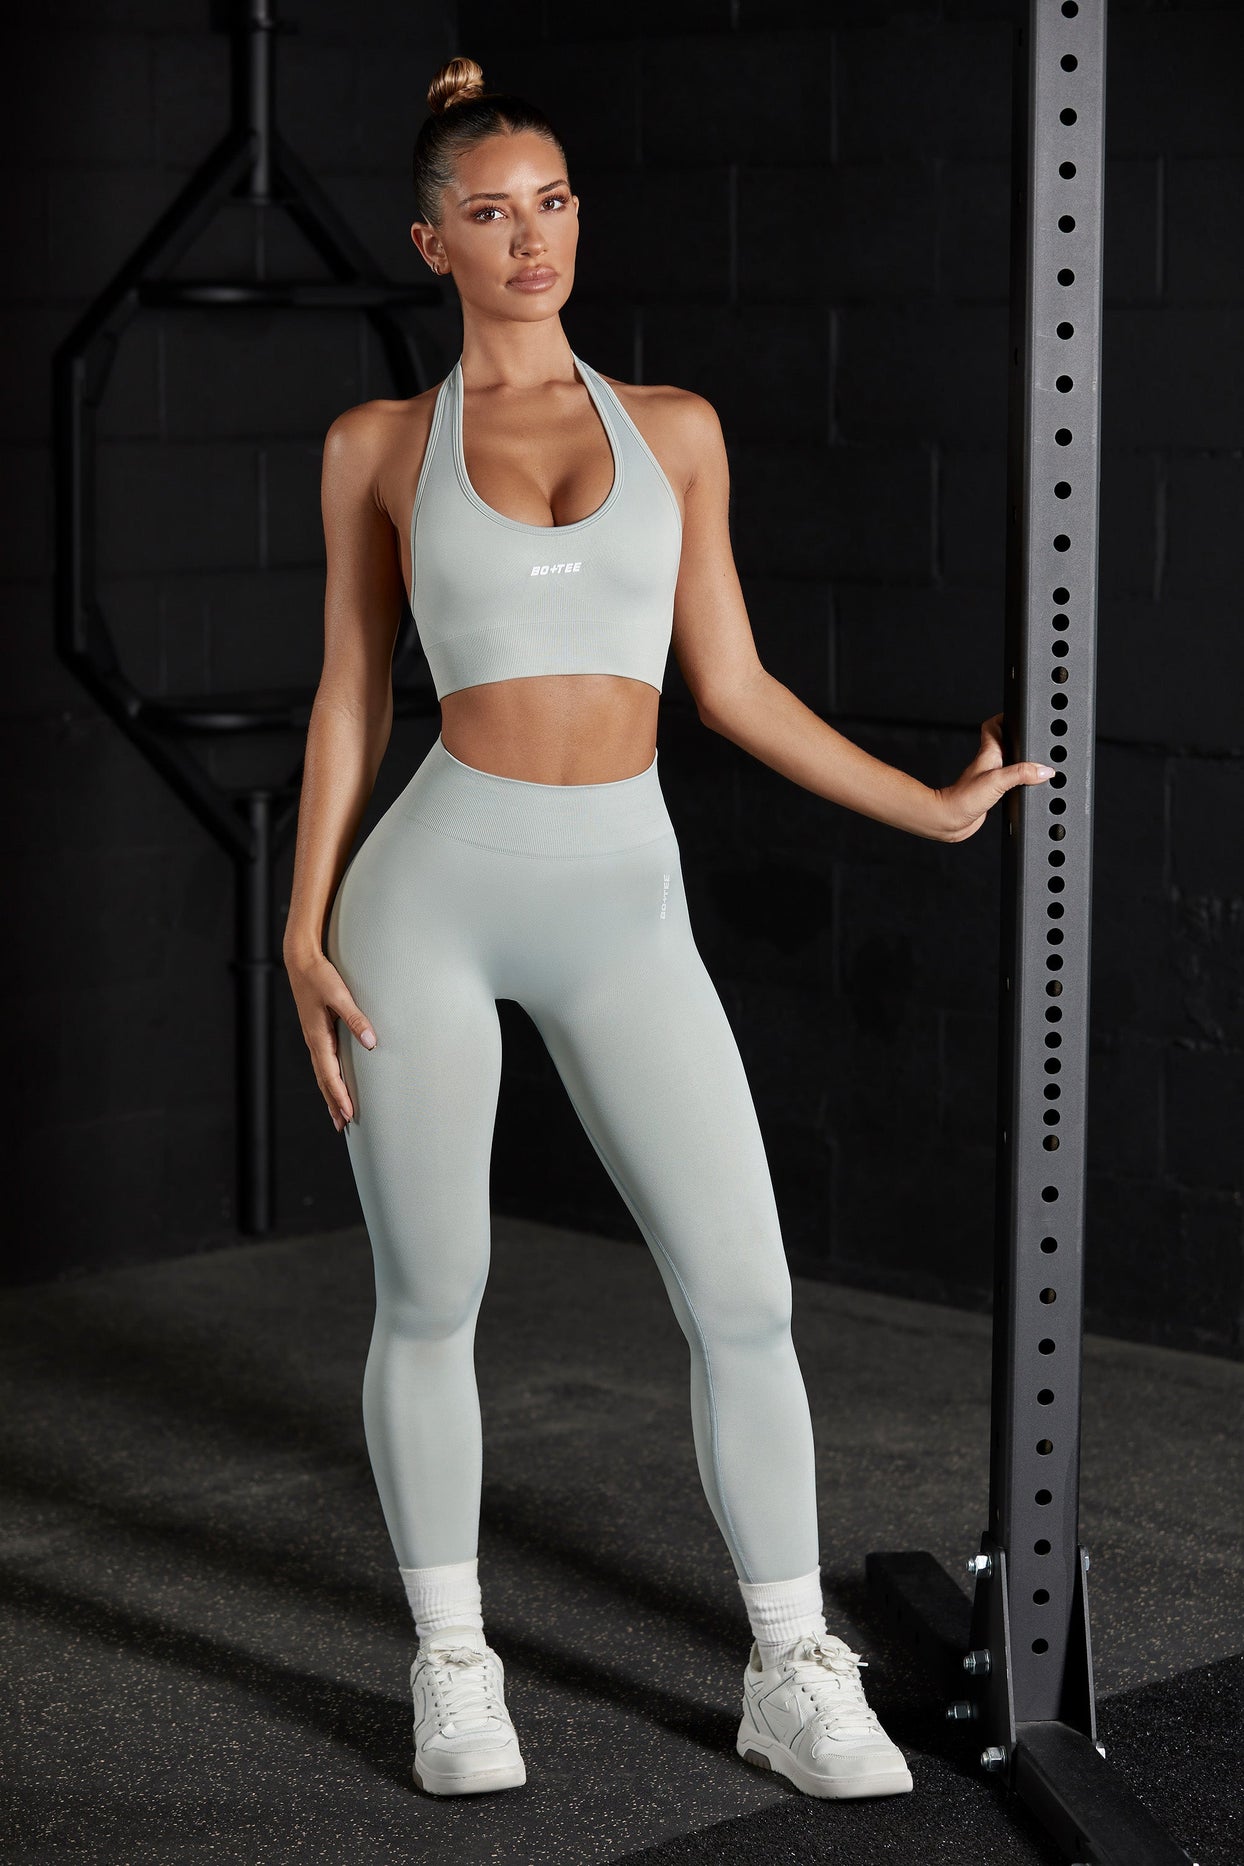 Front view of grey high waisted sports leggings